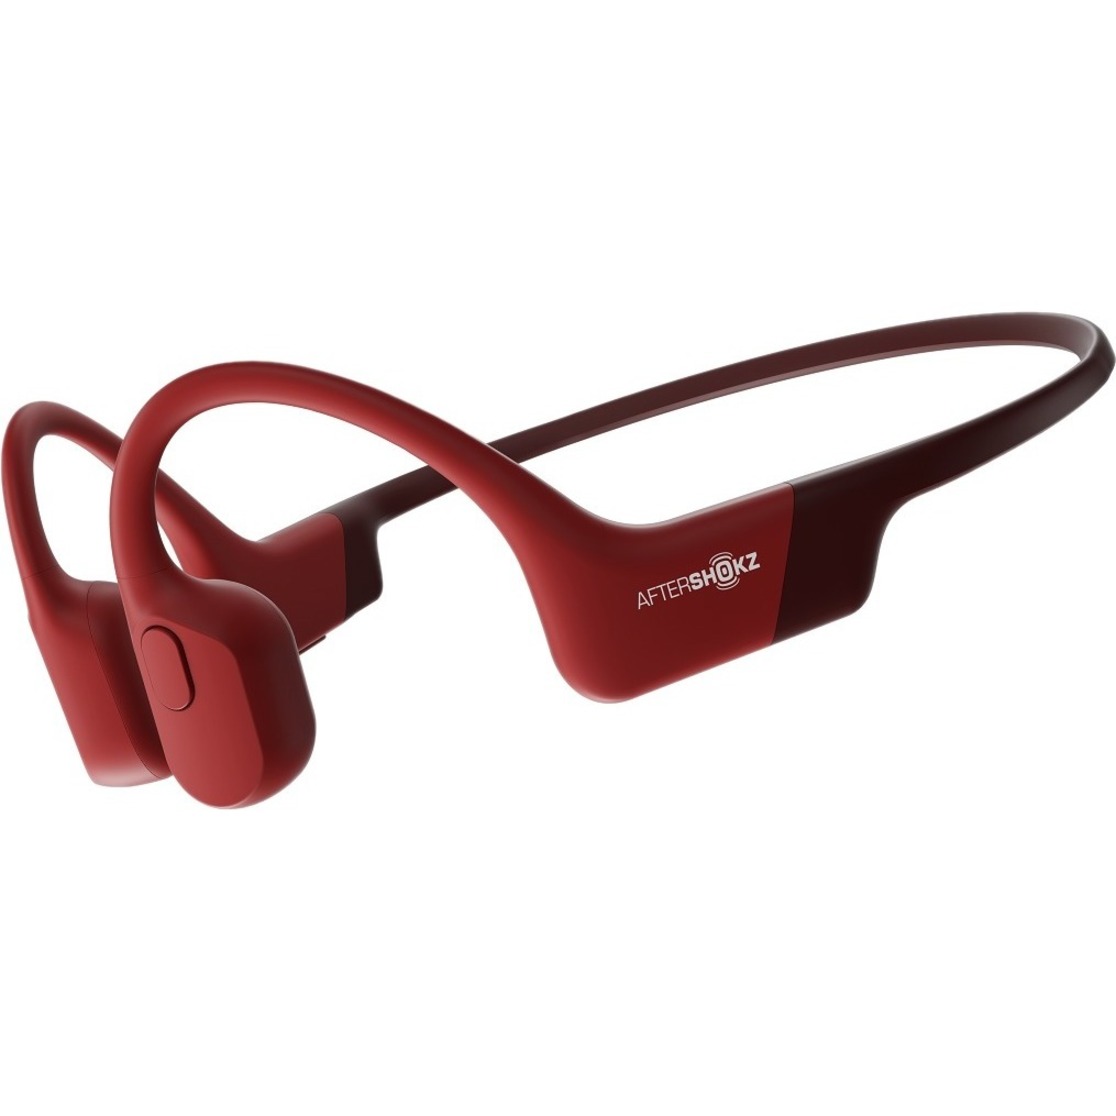 AfterShokz Aeropex - Open Ear Bluetooth Bone Conduction Sports Headphones - Sweat Resistant Wireless Earphones for Workouts and Running with Built in Mic (Solar Red) - image 1 of 8